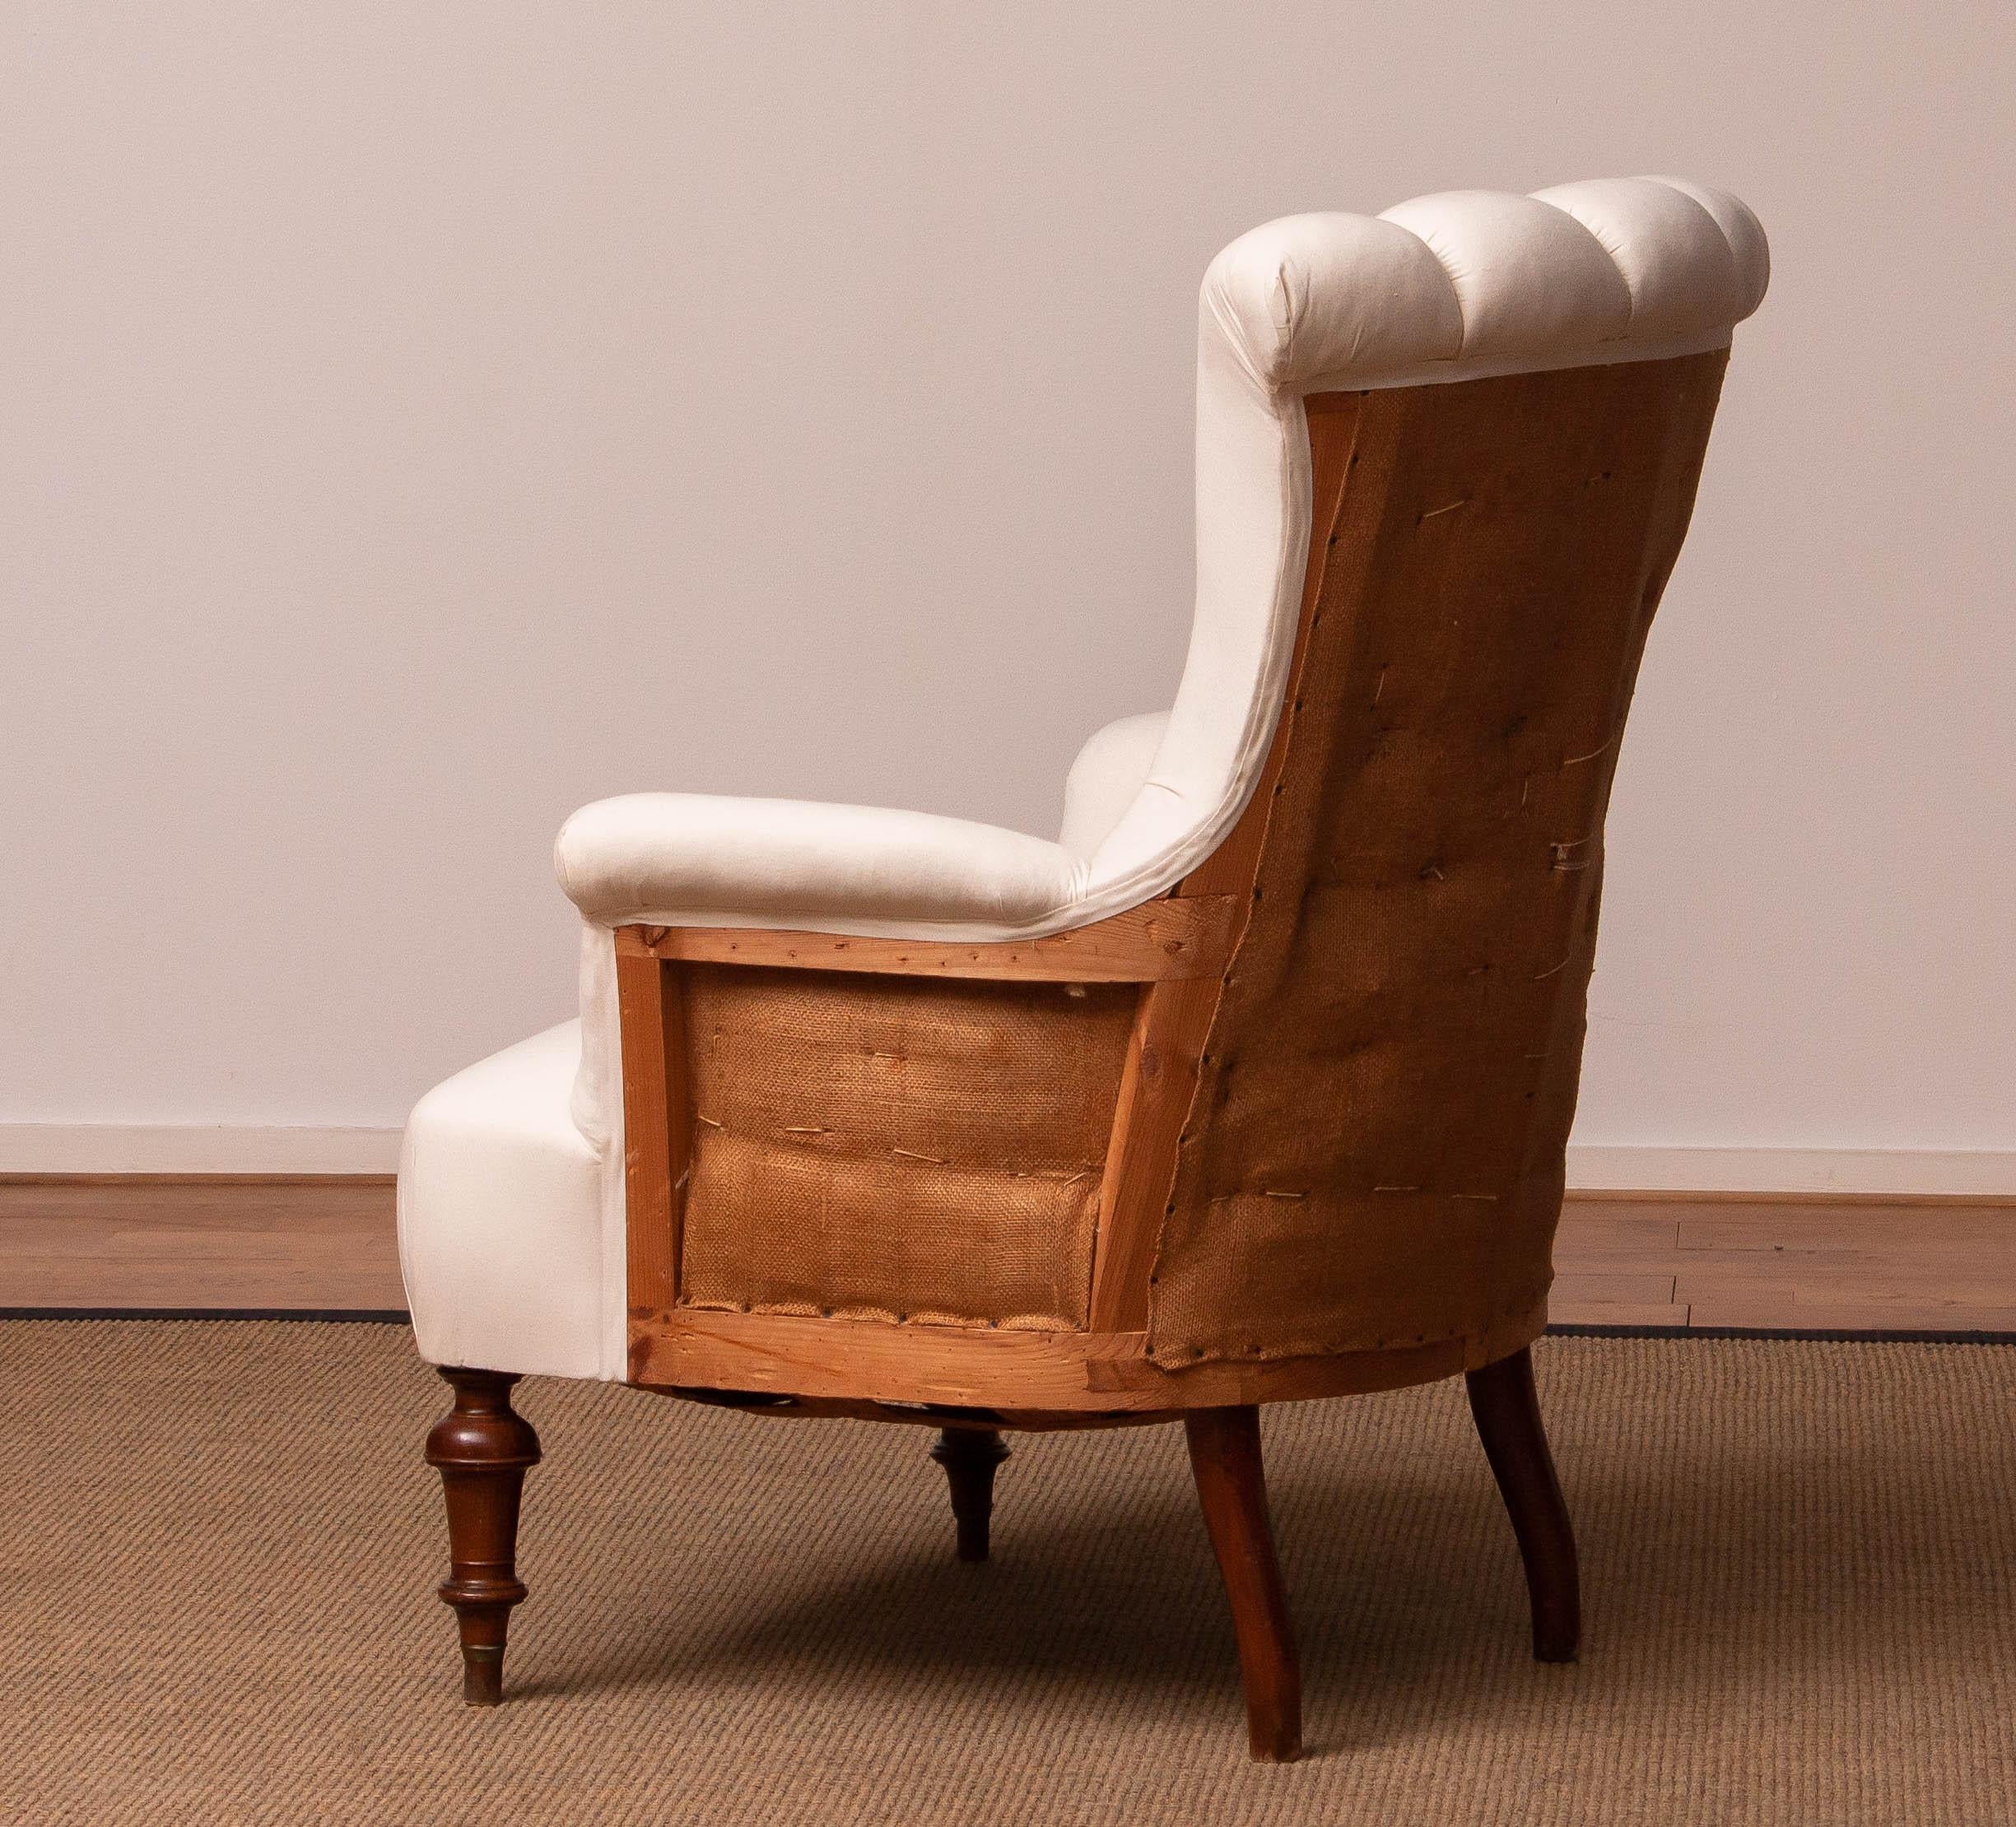 19th Century Domestic Cotton Victorian 'Deconstructed' Tufted Scroll-Back Chair For Sale 3